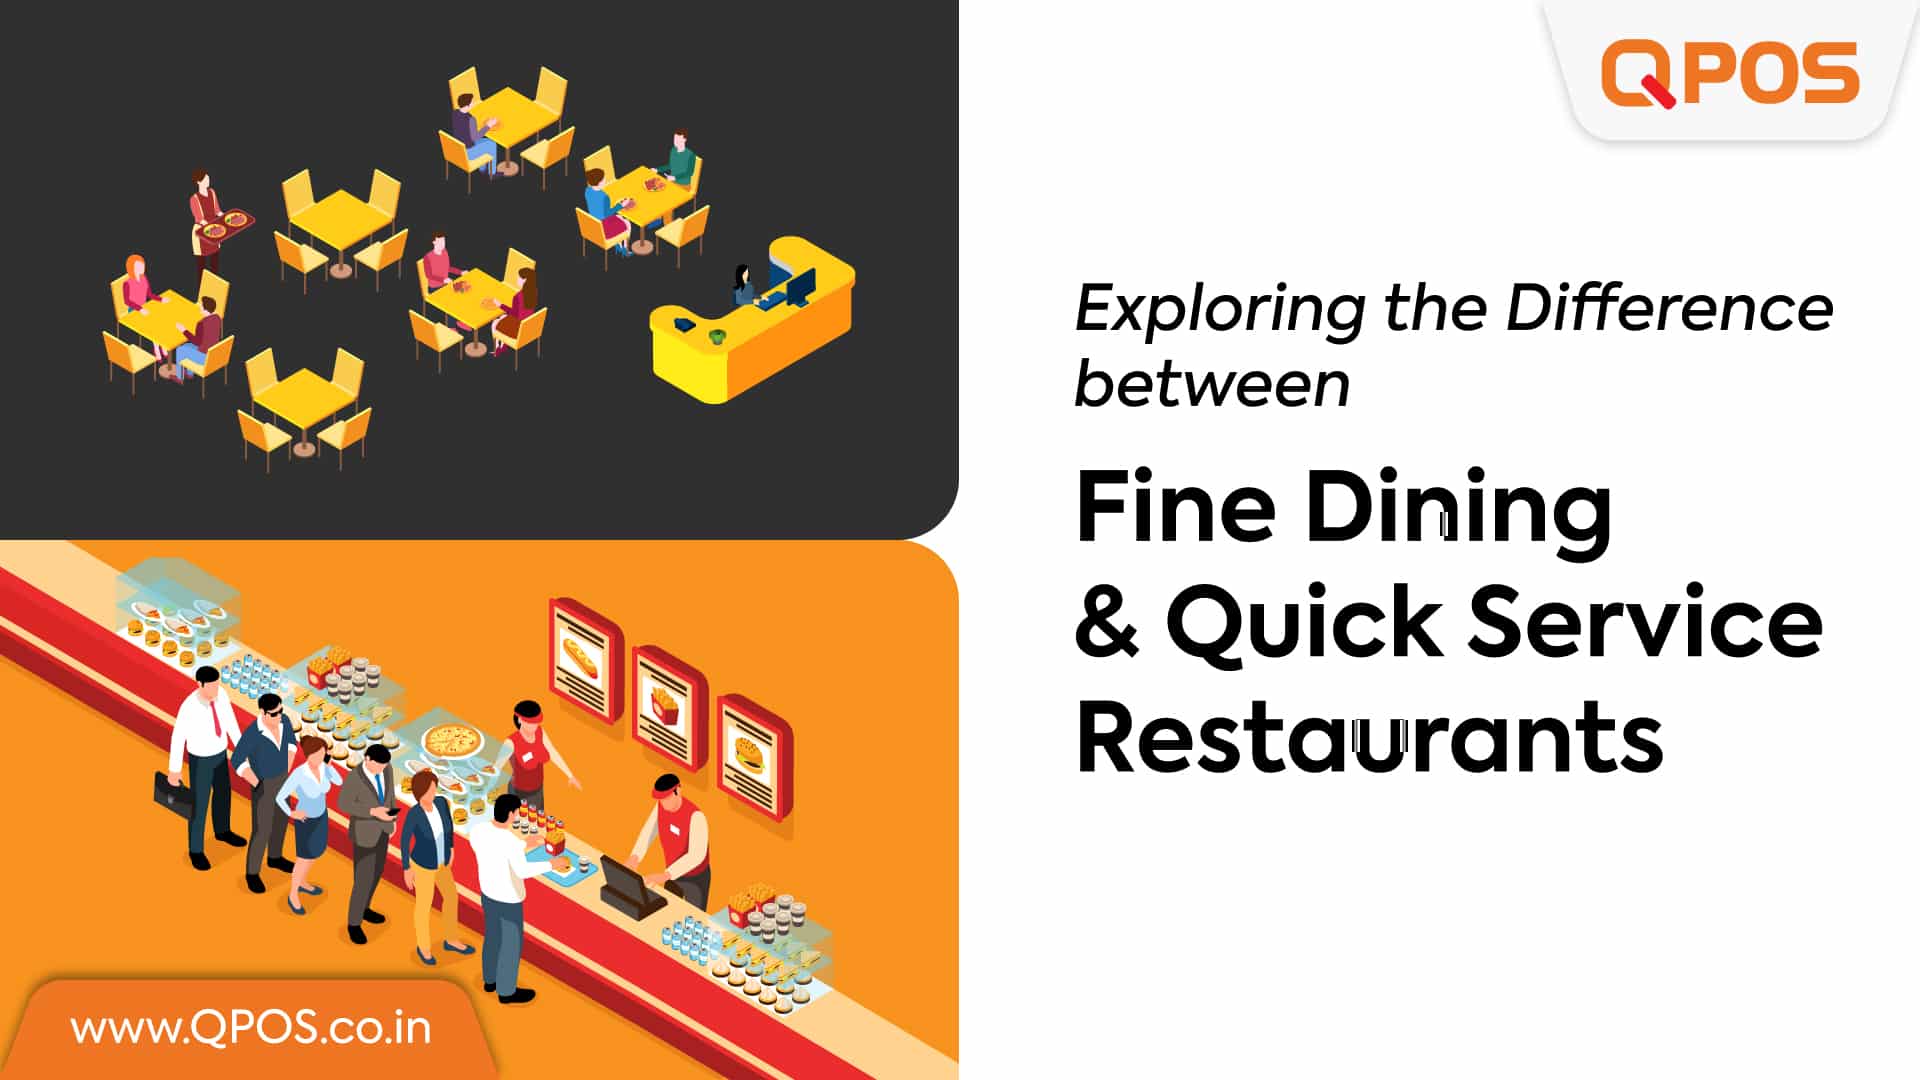 QPOS-Difference between Fine Dining and Quick Service Restaurants